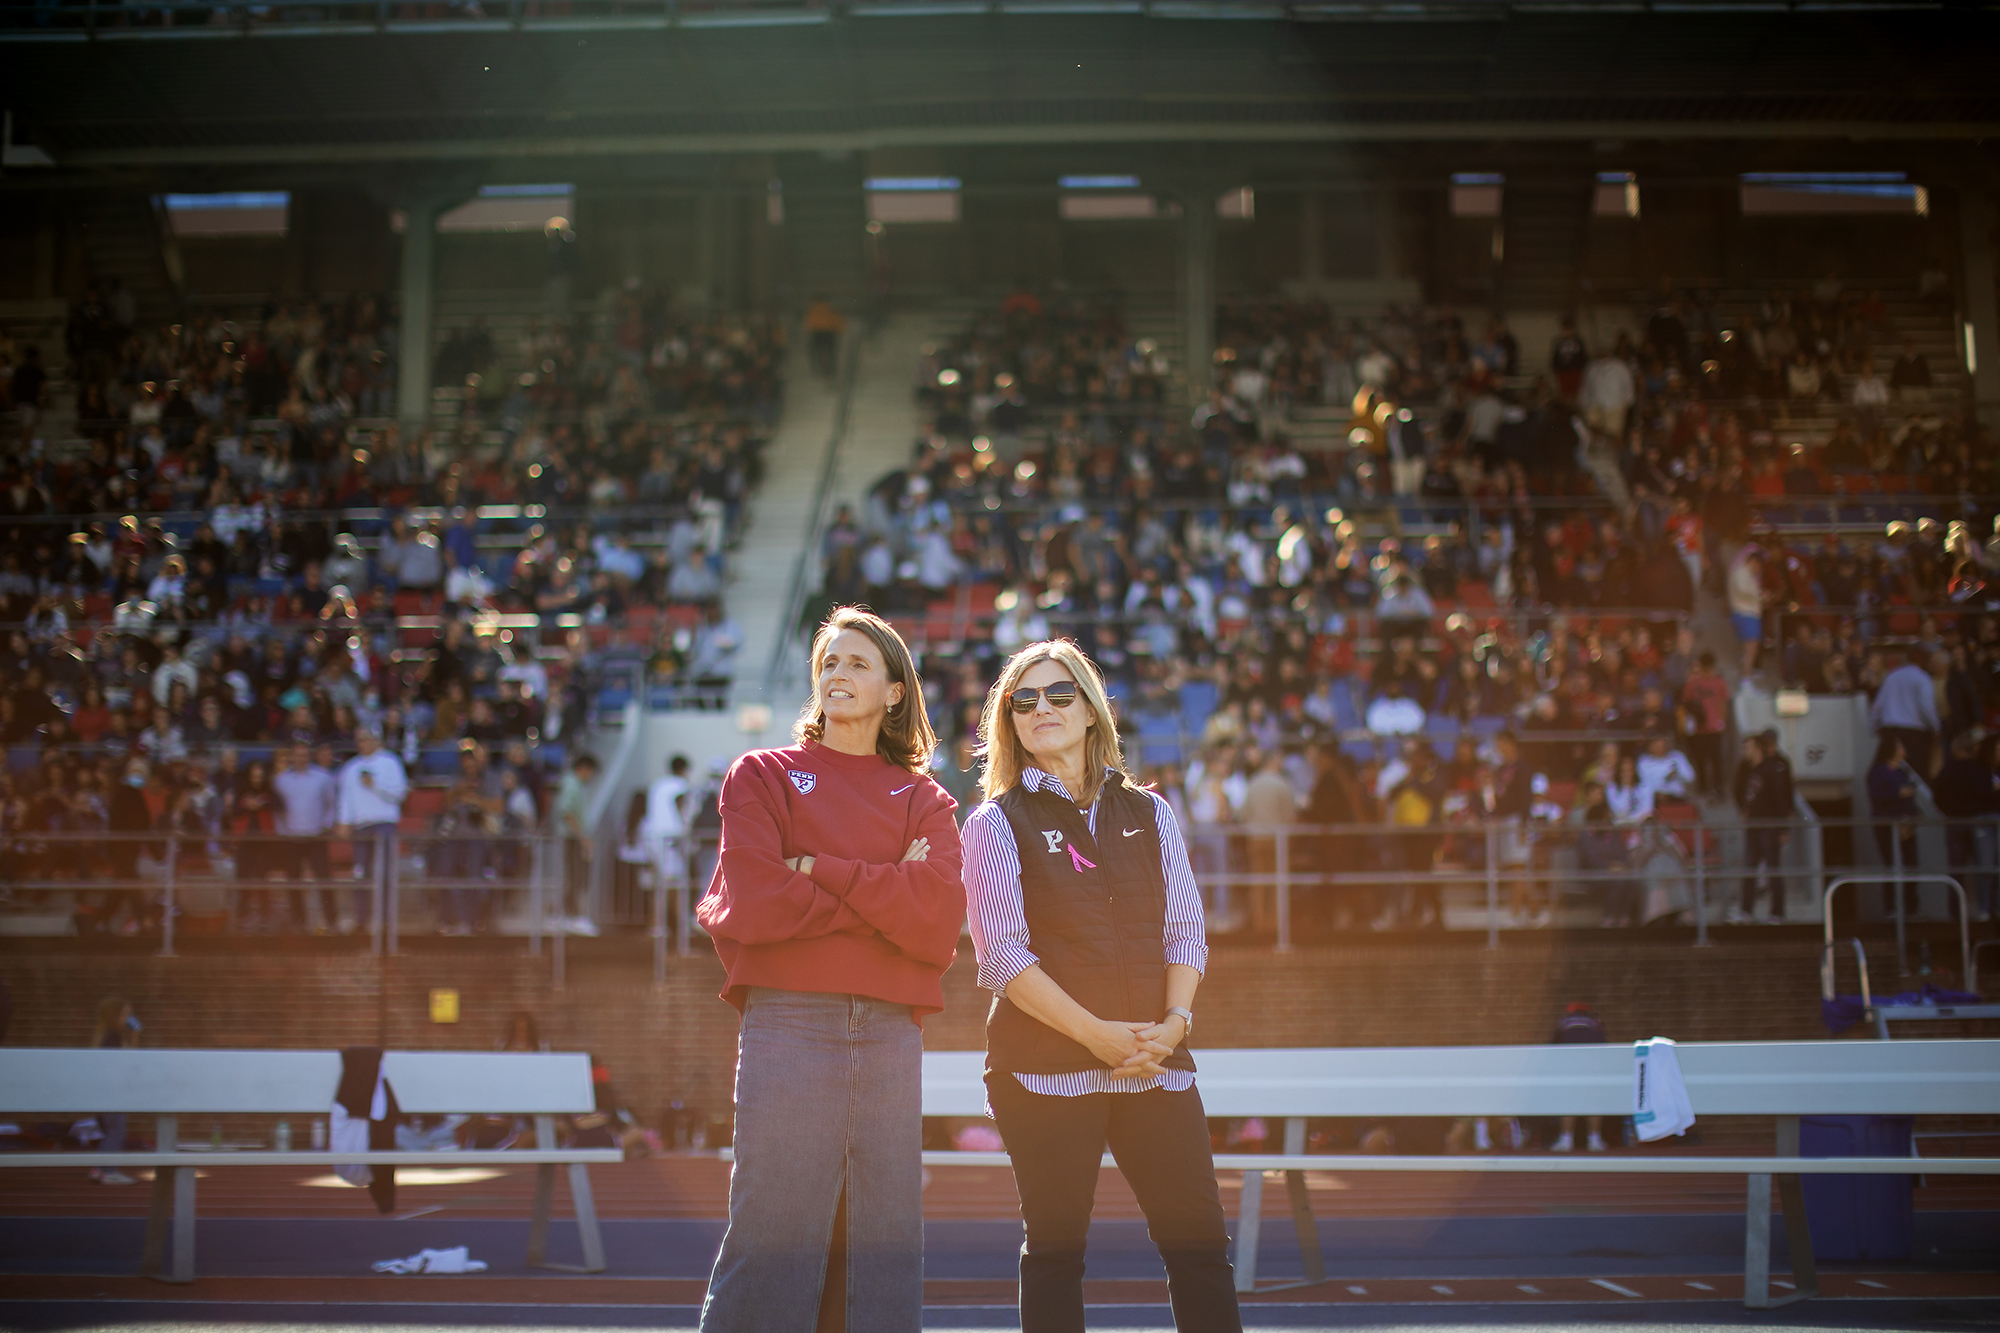 AD Alanna Shanahan and President Liz Magill take in the game from the sidelines.